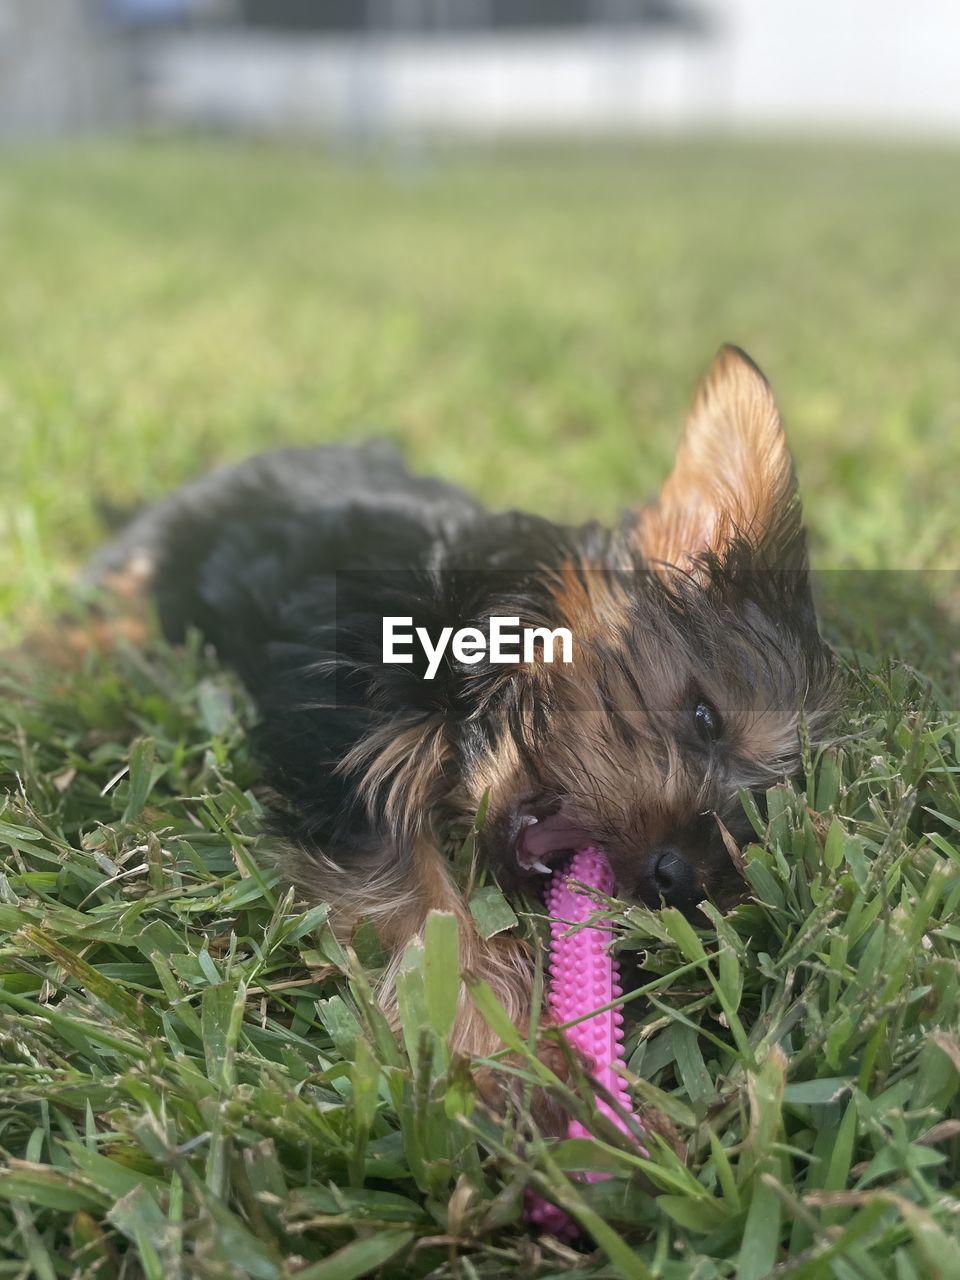 pet, one animal, animal themes, mammal, dog, animal, domestic animals, canine, grass, plant, terrier, yorkshire terrier, lap dog, nature, no people, young animal, puppy, carnivore, day, cute, portrait, outdoors, animal body part, green, front or back yard, close-up, field